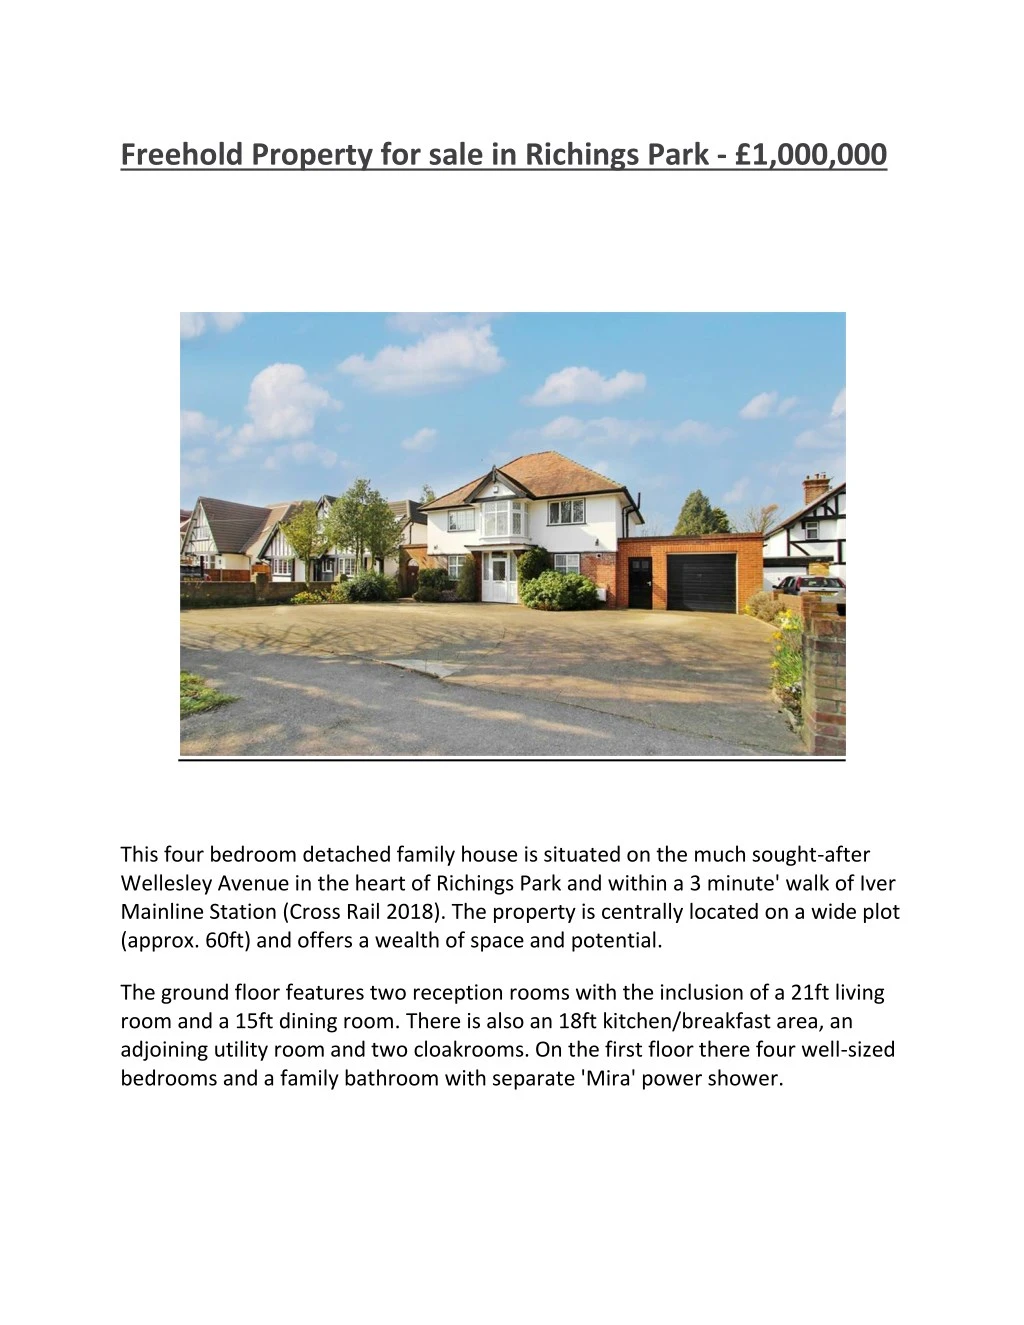 freehold property for sale in richings park